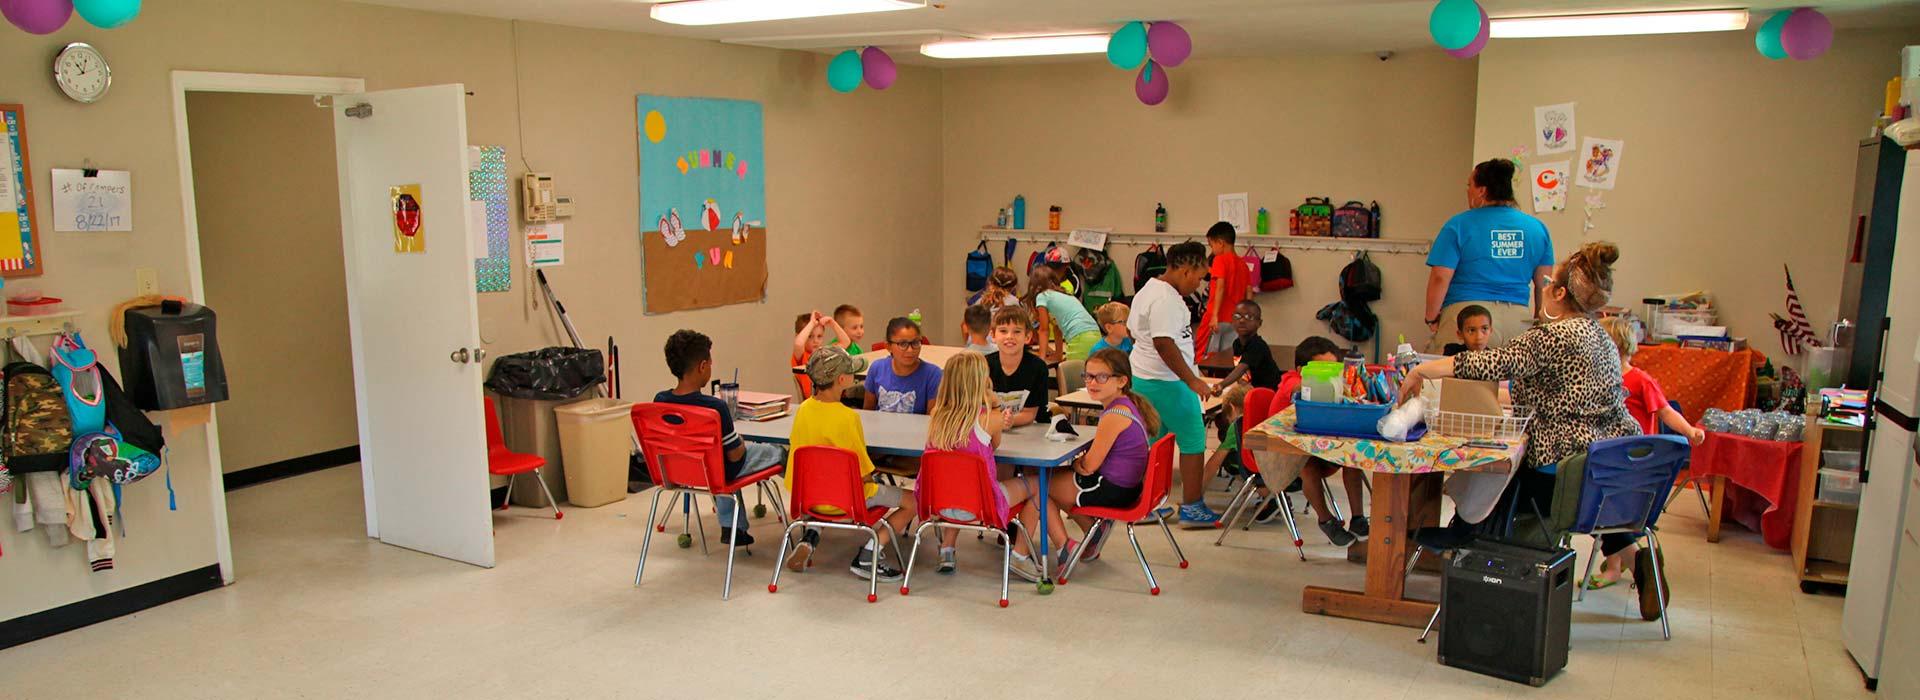 Before & After-School participants in table activity at Salem YMCA Family Center